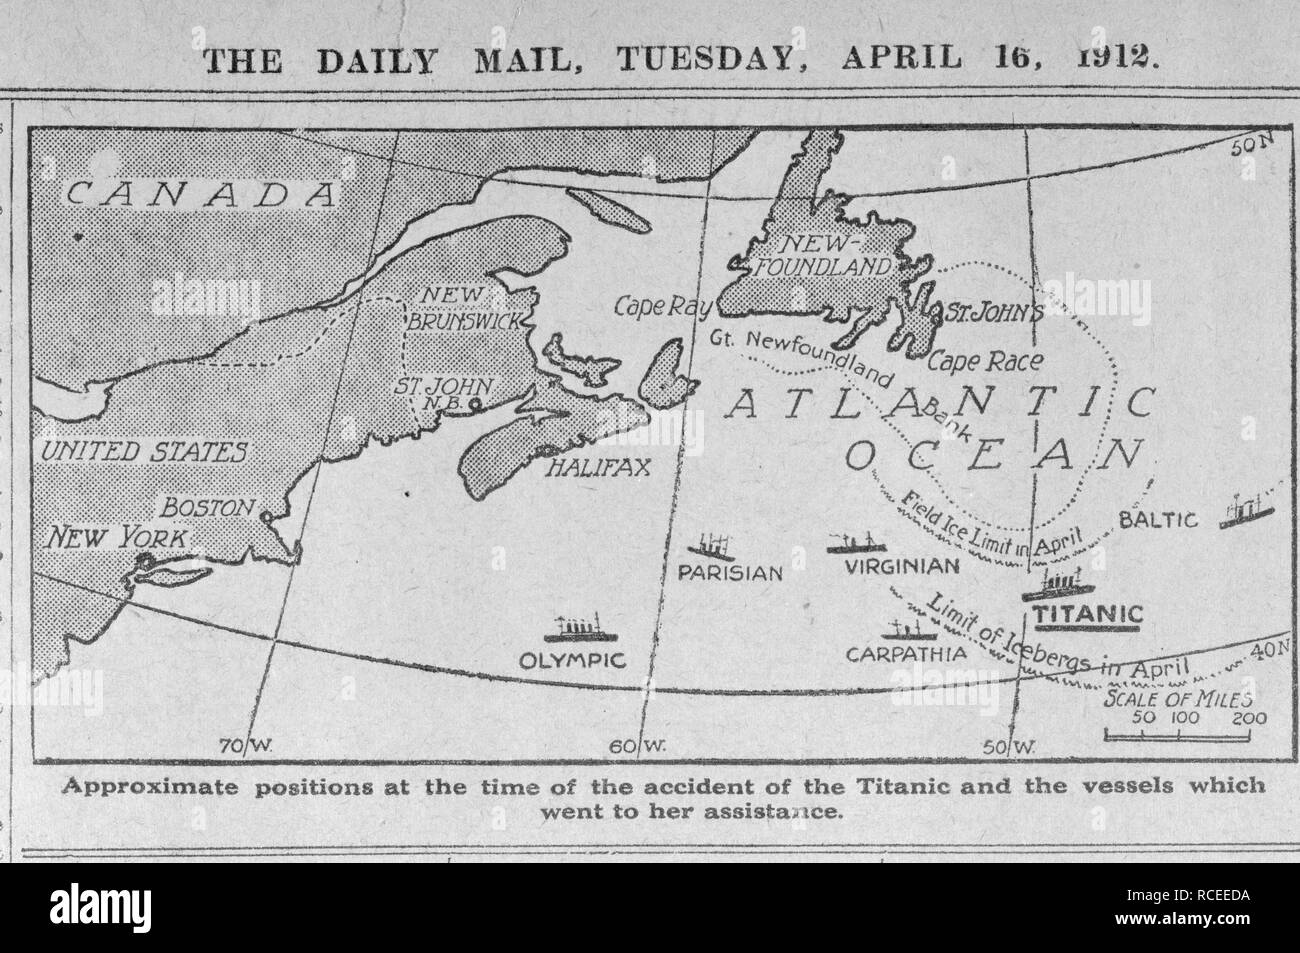 Titanic location map. The Daily Mail. London, April 16, 1912. Source: Colindale, 9. Language: English. Stock Photo